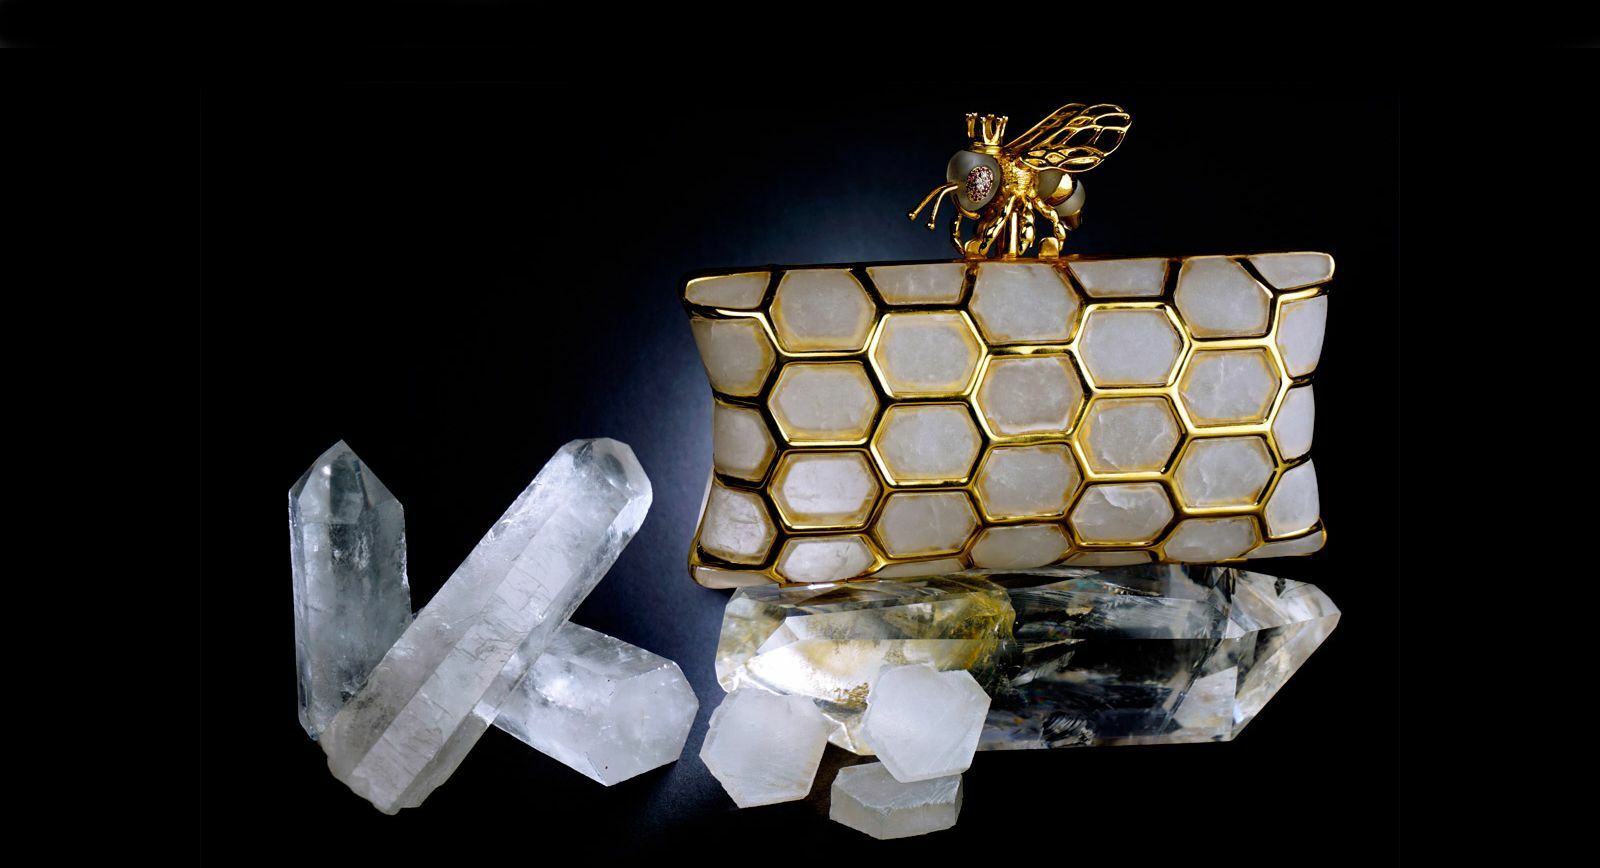 The Queen Bee Clutch by L’AQUART – the Unity of Fashion and Lapidary Art